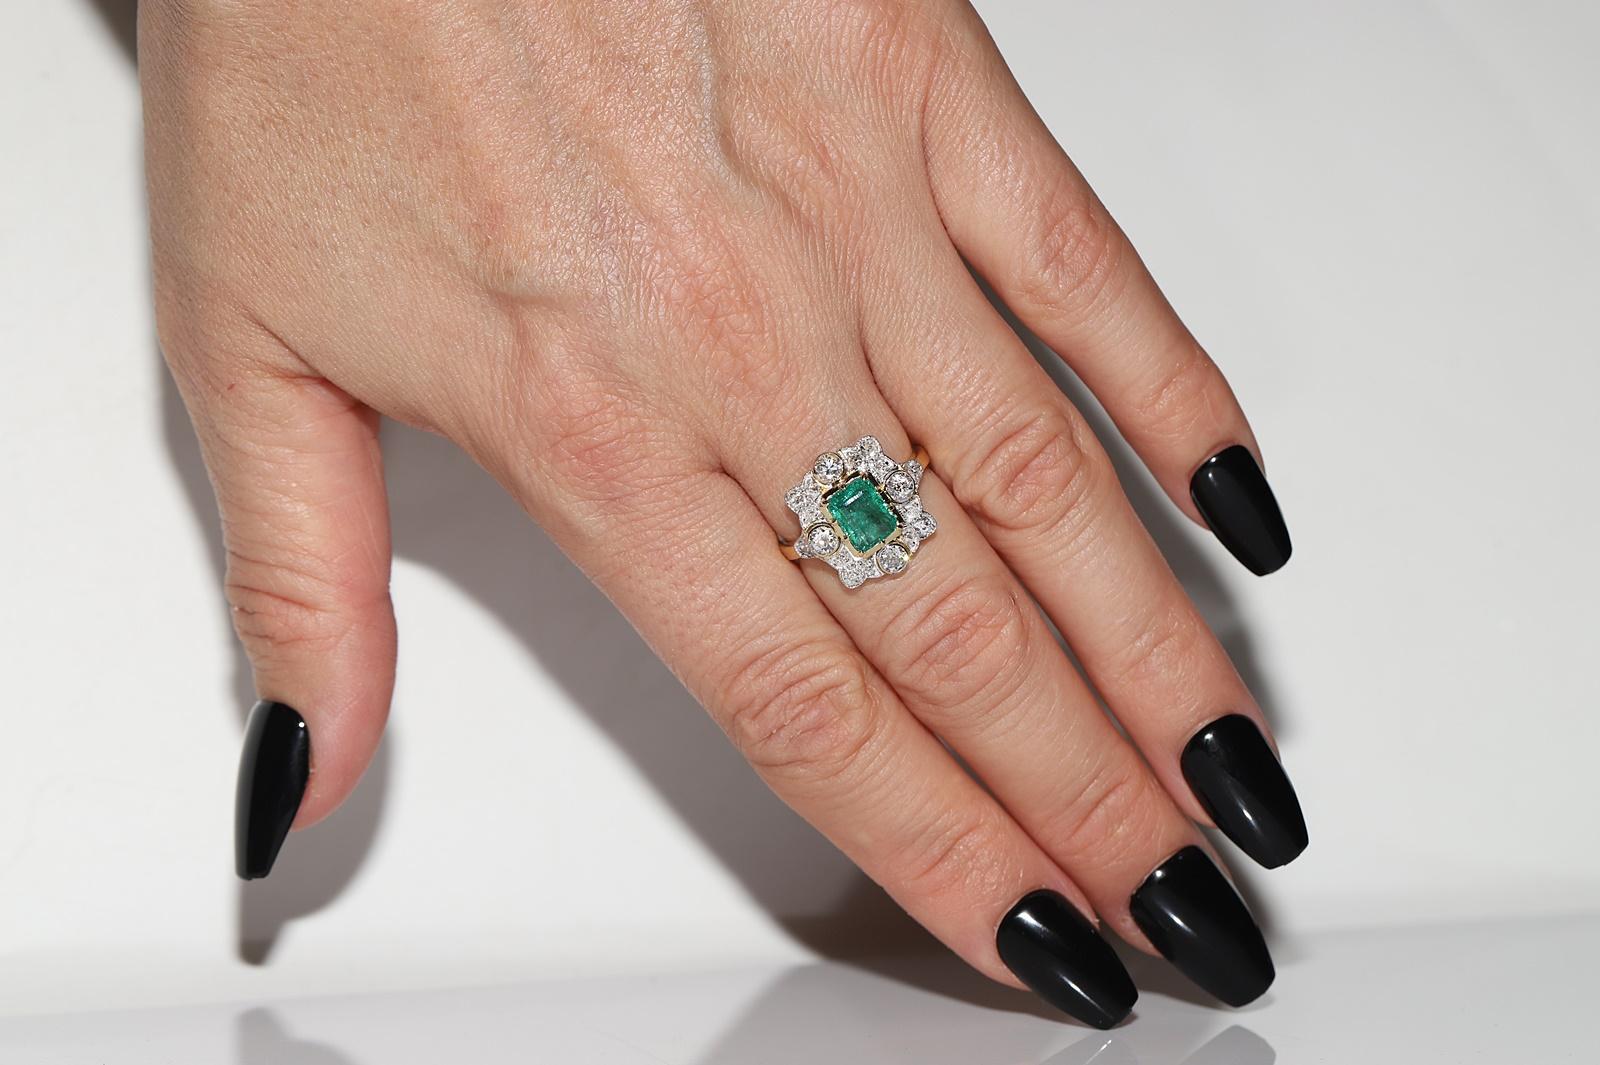 In very good condition.
Total weight is 5.6 grams.
Totally is diamond 0.92 ct.
The diamond is has G-H color and vvs-vs-s1-s2 clarity.
Totally is emerald 1.26 ct.
Ring size is US 6.5 (We offer free resizing)
We can make any size.
Please contact for